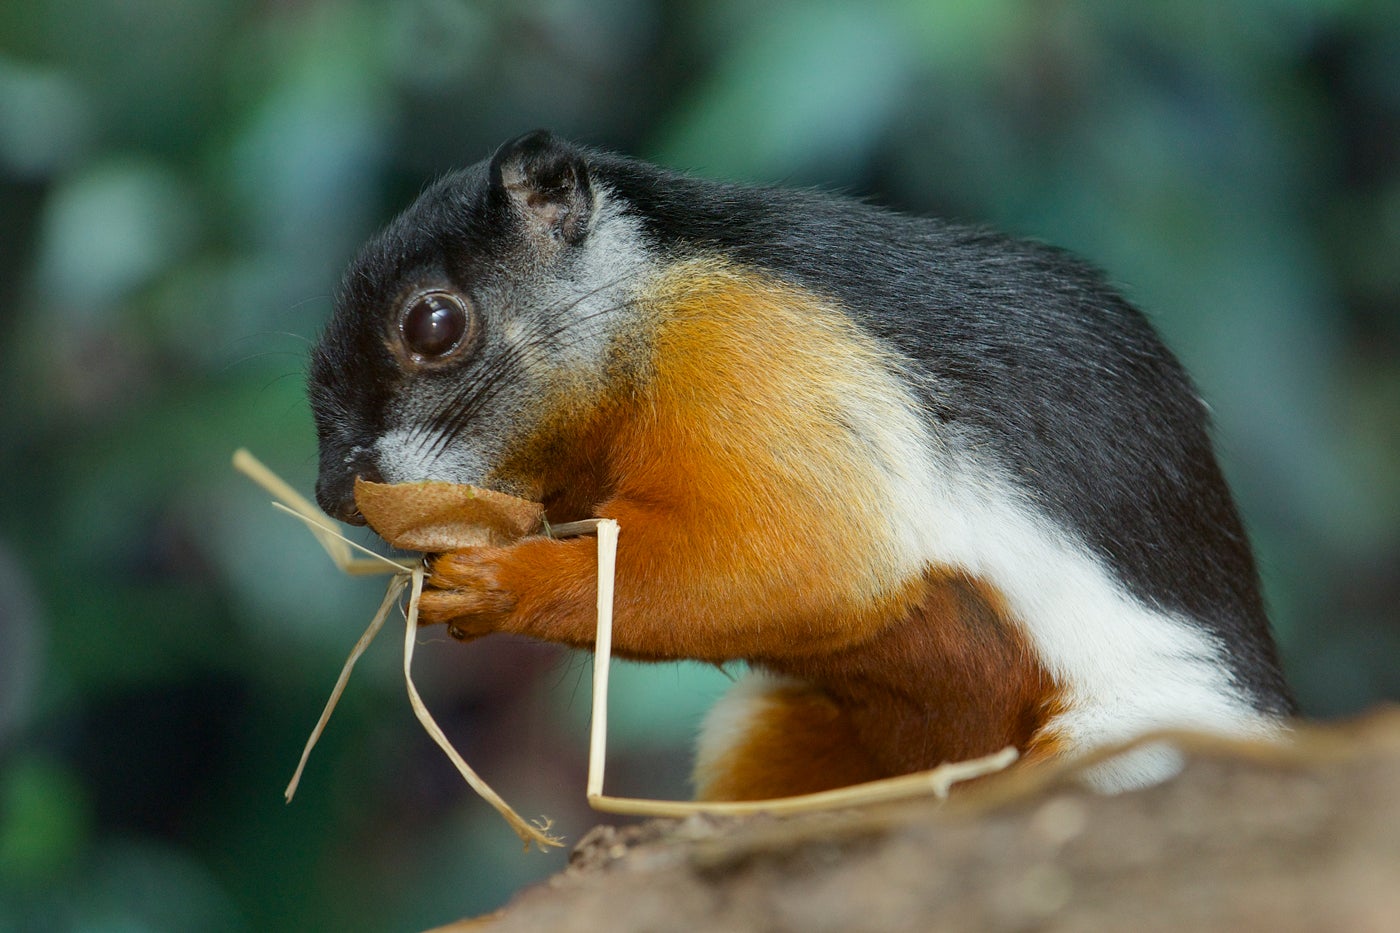 A small squirrel, called a Prevost's squirrel, with whiskers, short pointed ears and a bushy tail eating. Its thick fur is black, white and brown-red.